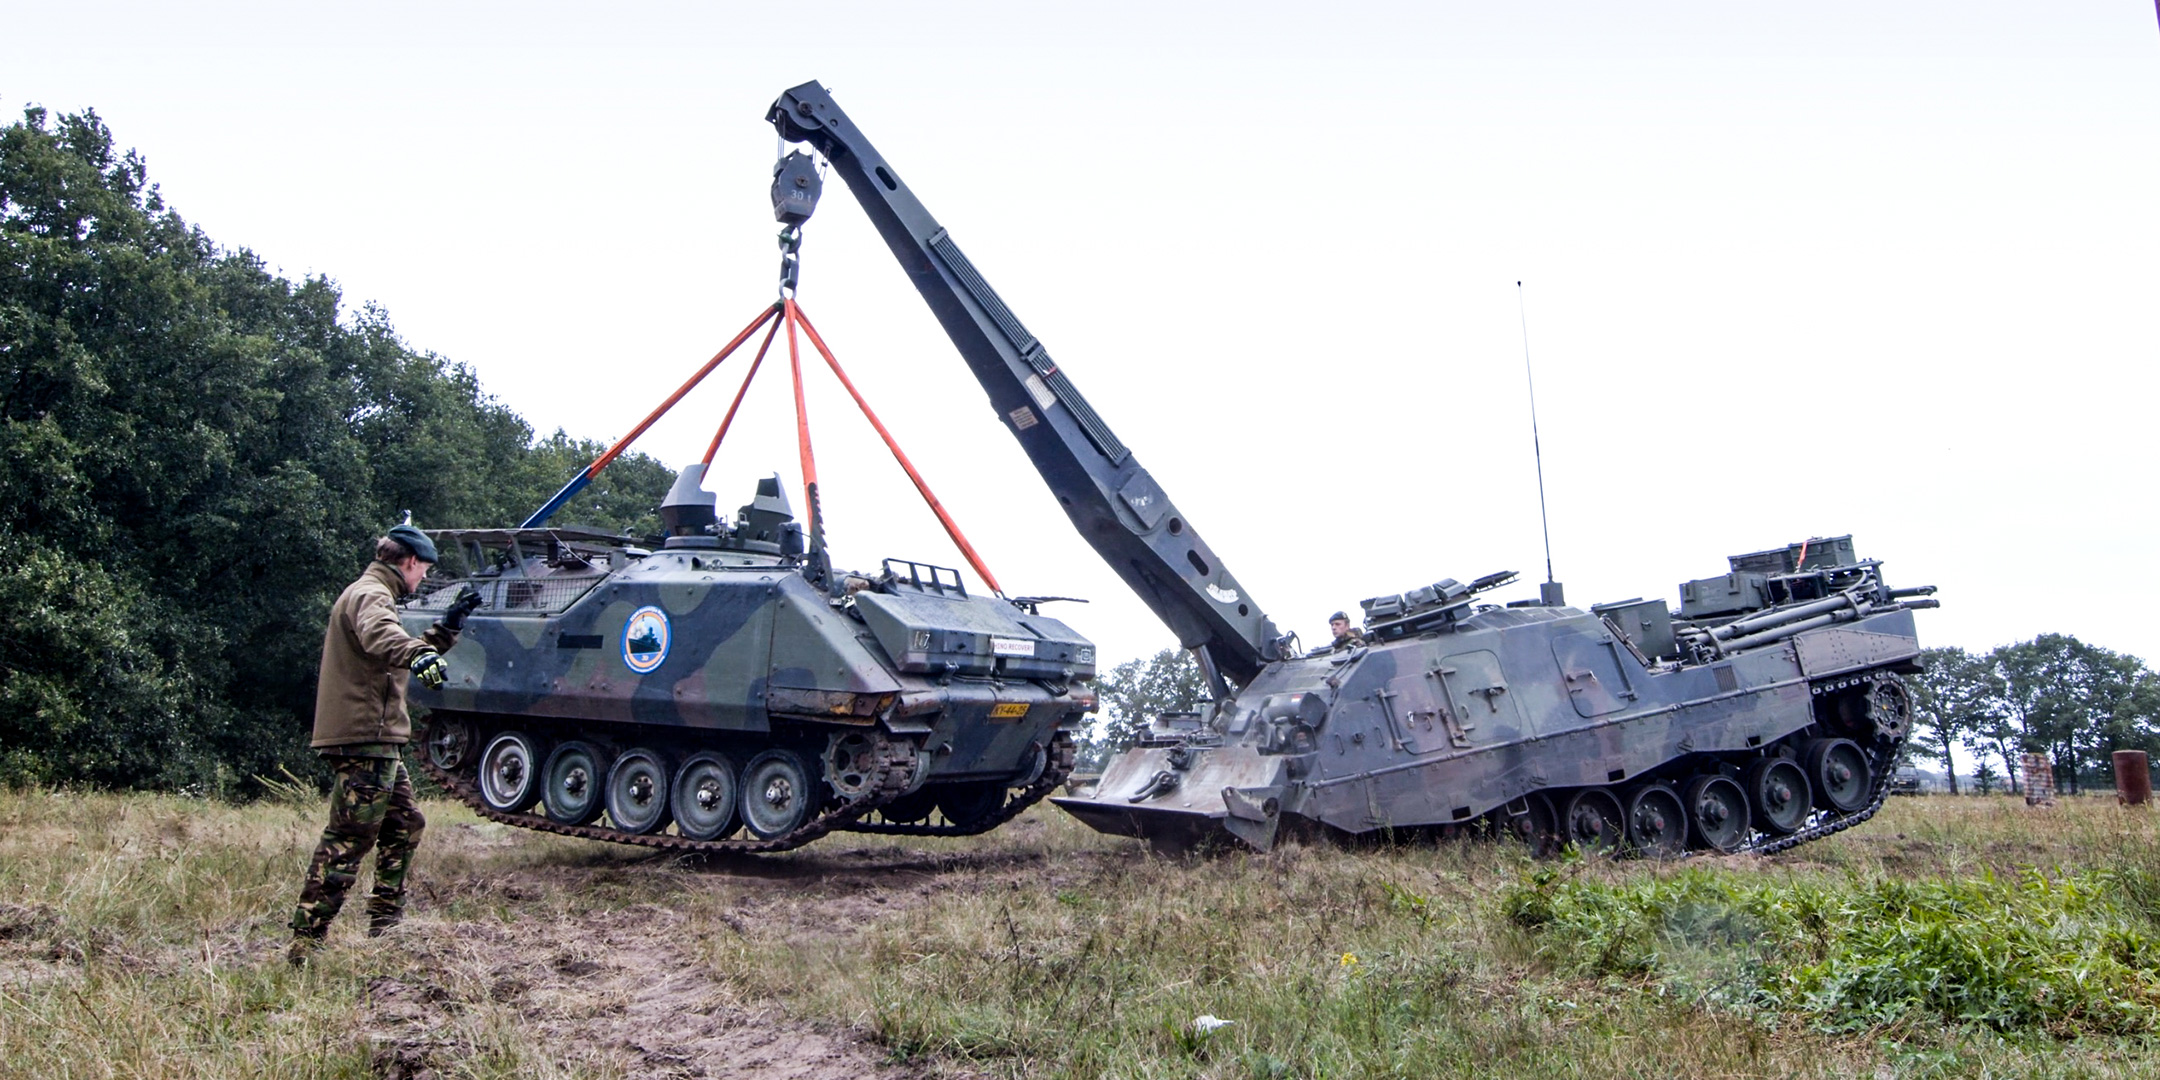 lifting-12-tonne-armored-vehicle-3d-printed-plastic-ultimaker-covestro-netherlands-navy